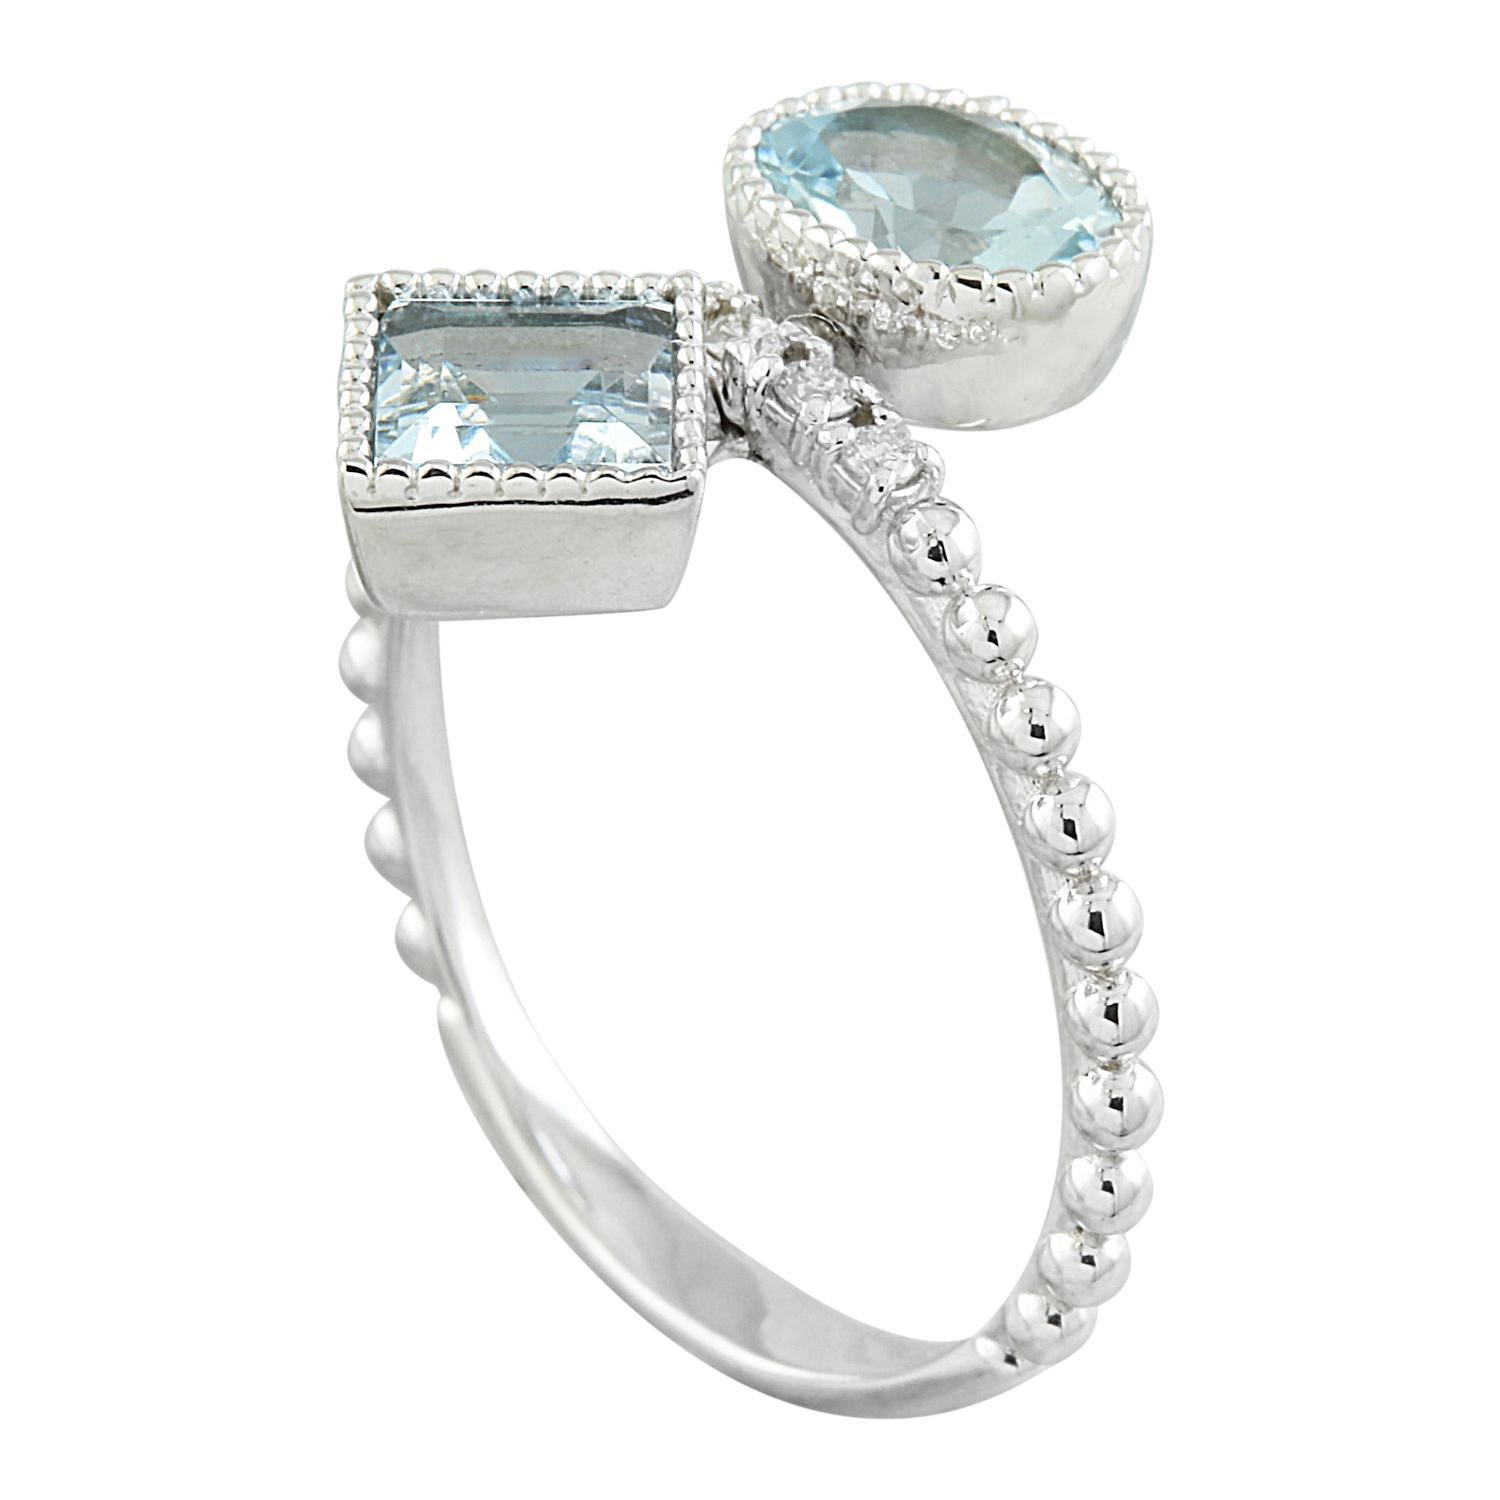 Modern Dazzling Aquamarine Diamond Ring: Exquisite Beauty in 14K Solid White Gold For Sale